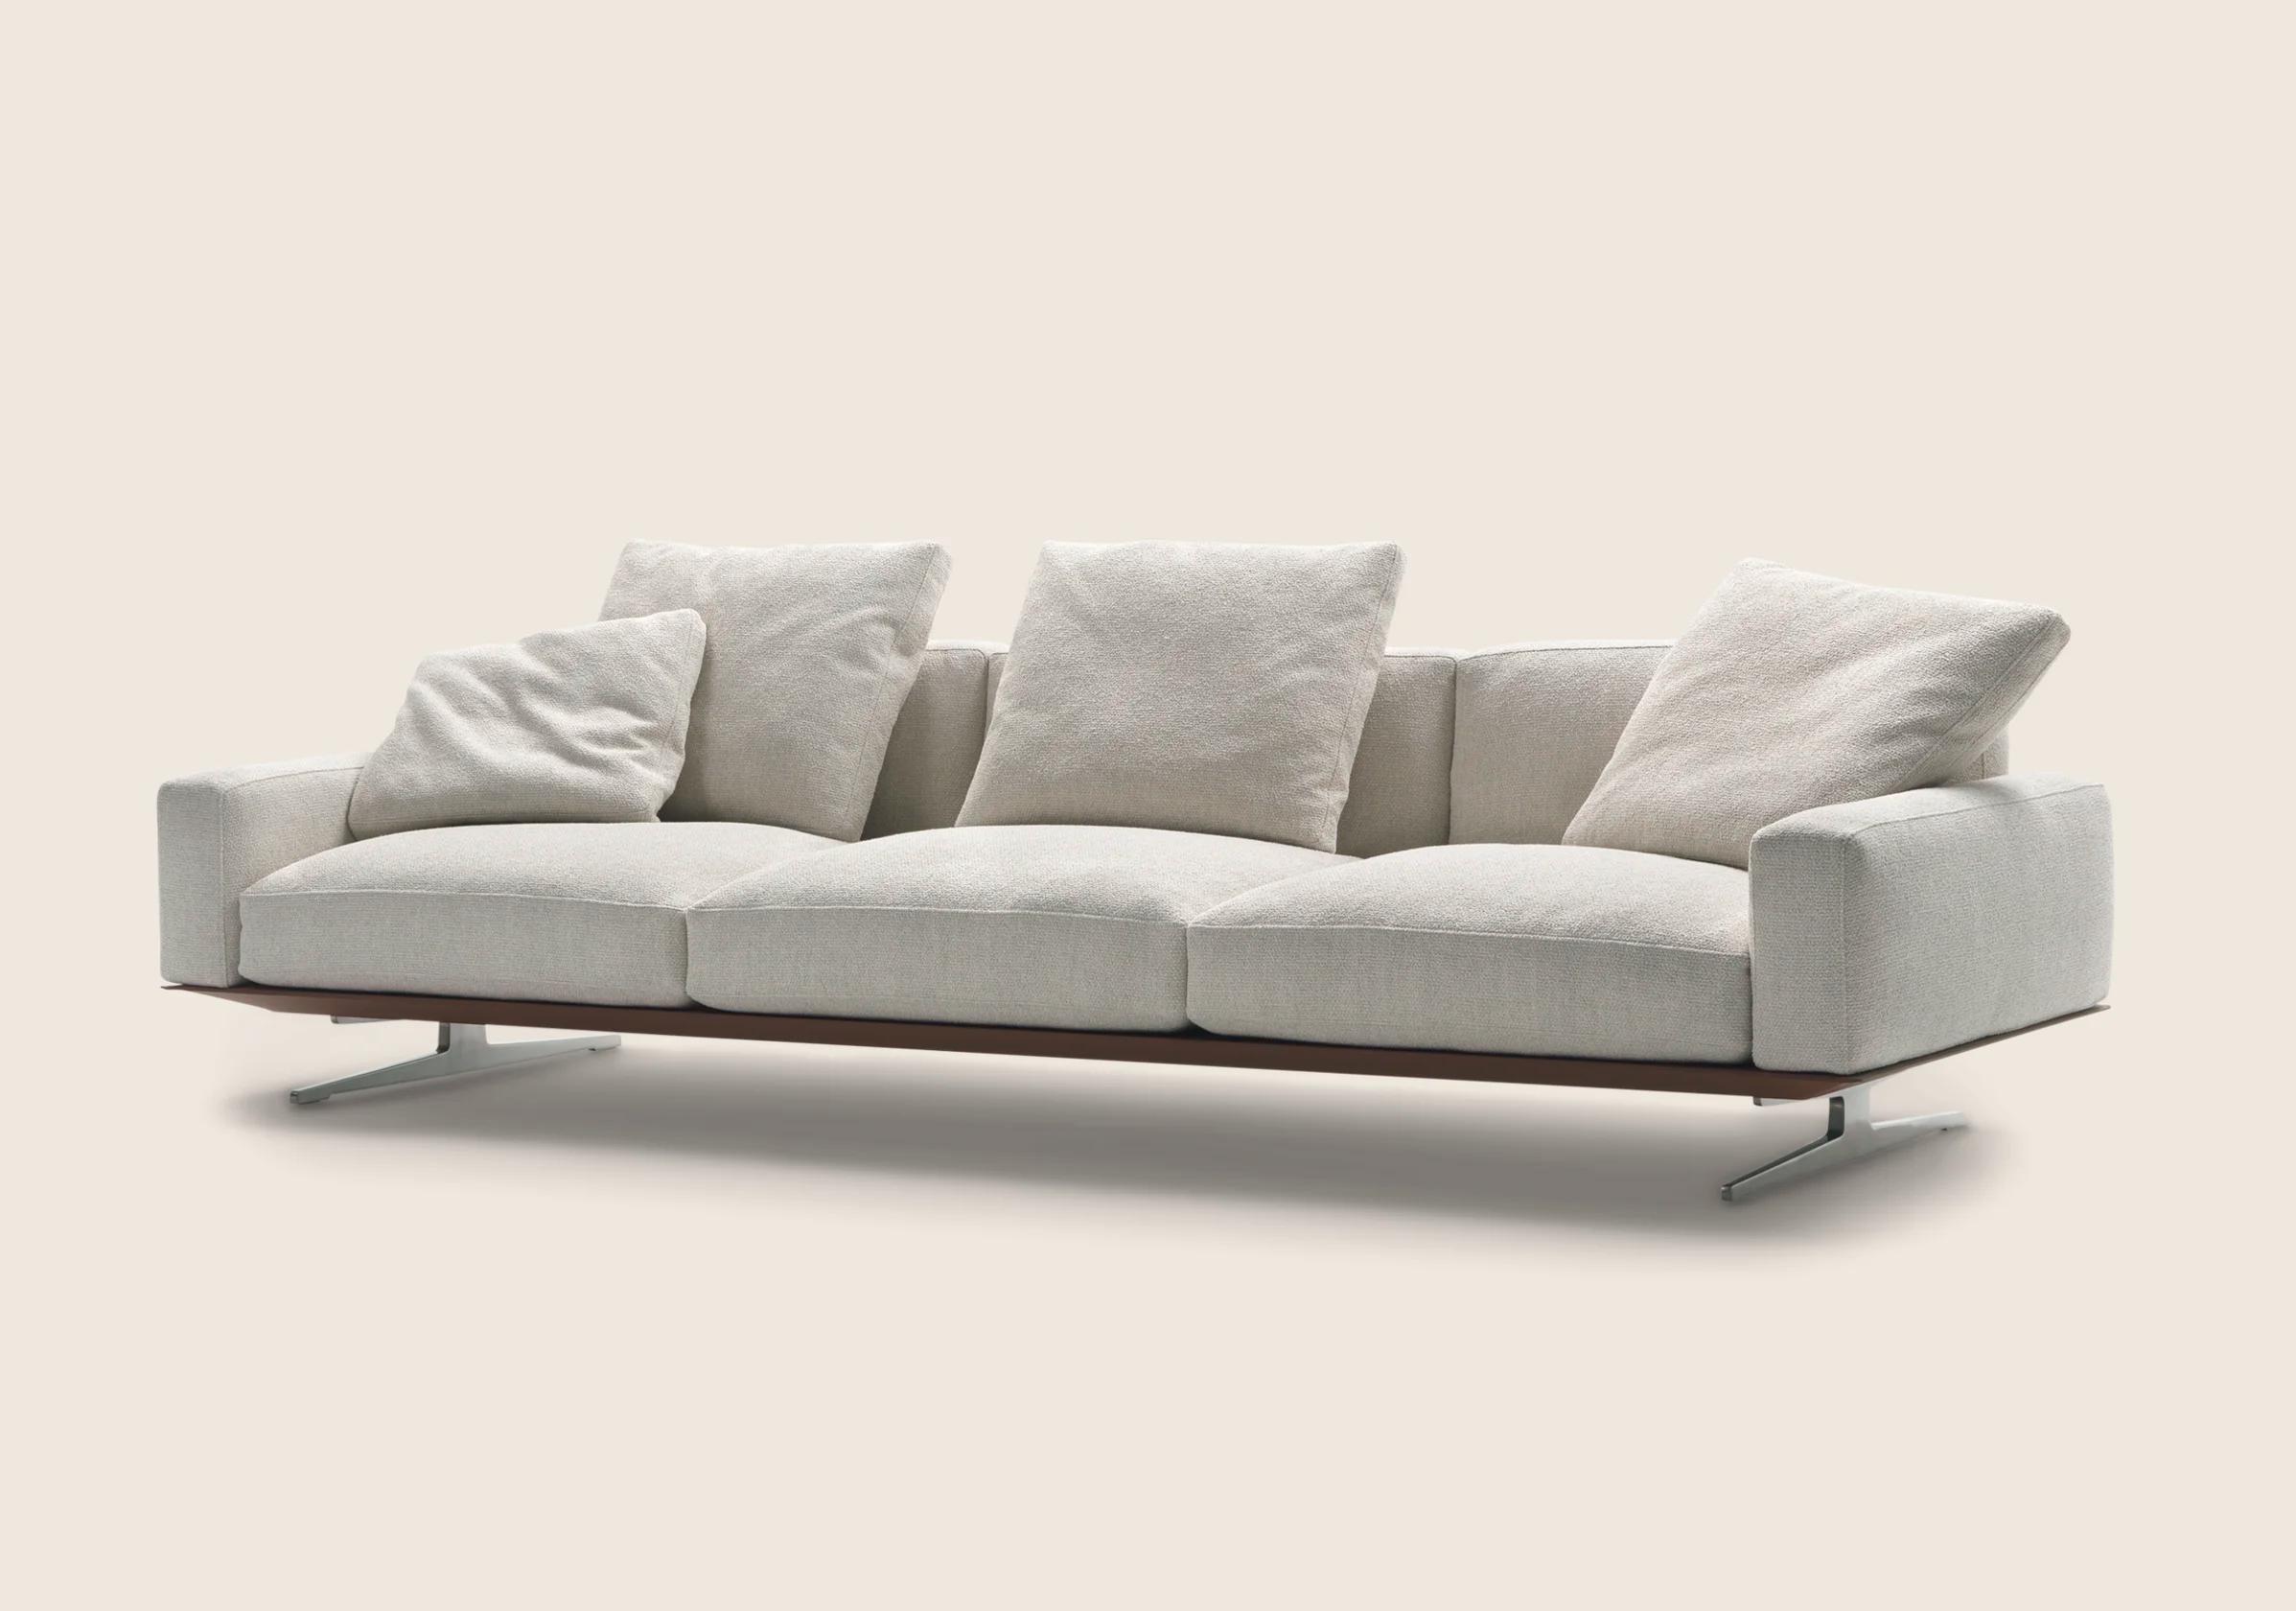 SOFT DREAM | SOFT DREAM LARGE Stand-alone sofas | Design Made in Italy